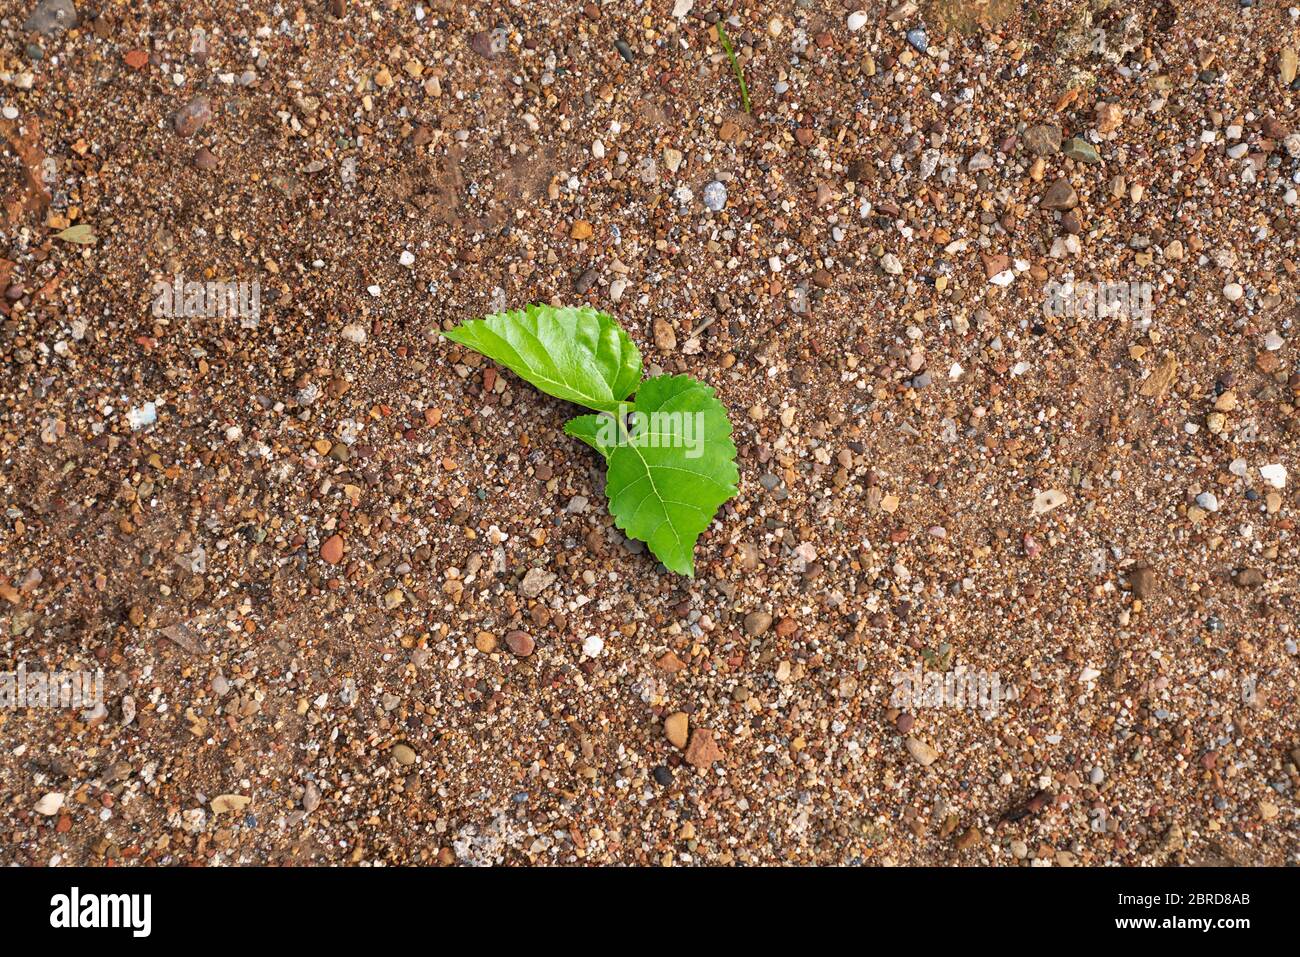 Young seedling growing on soil in natural habitats. New life and hope concept Stock Photo